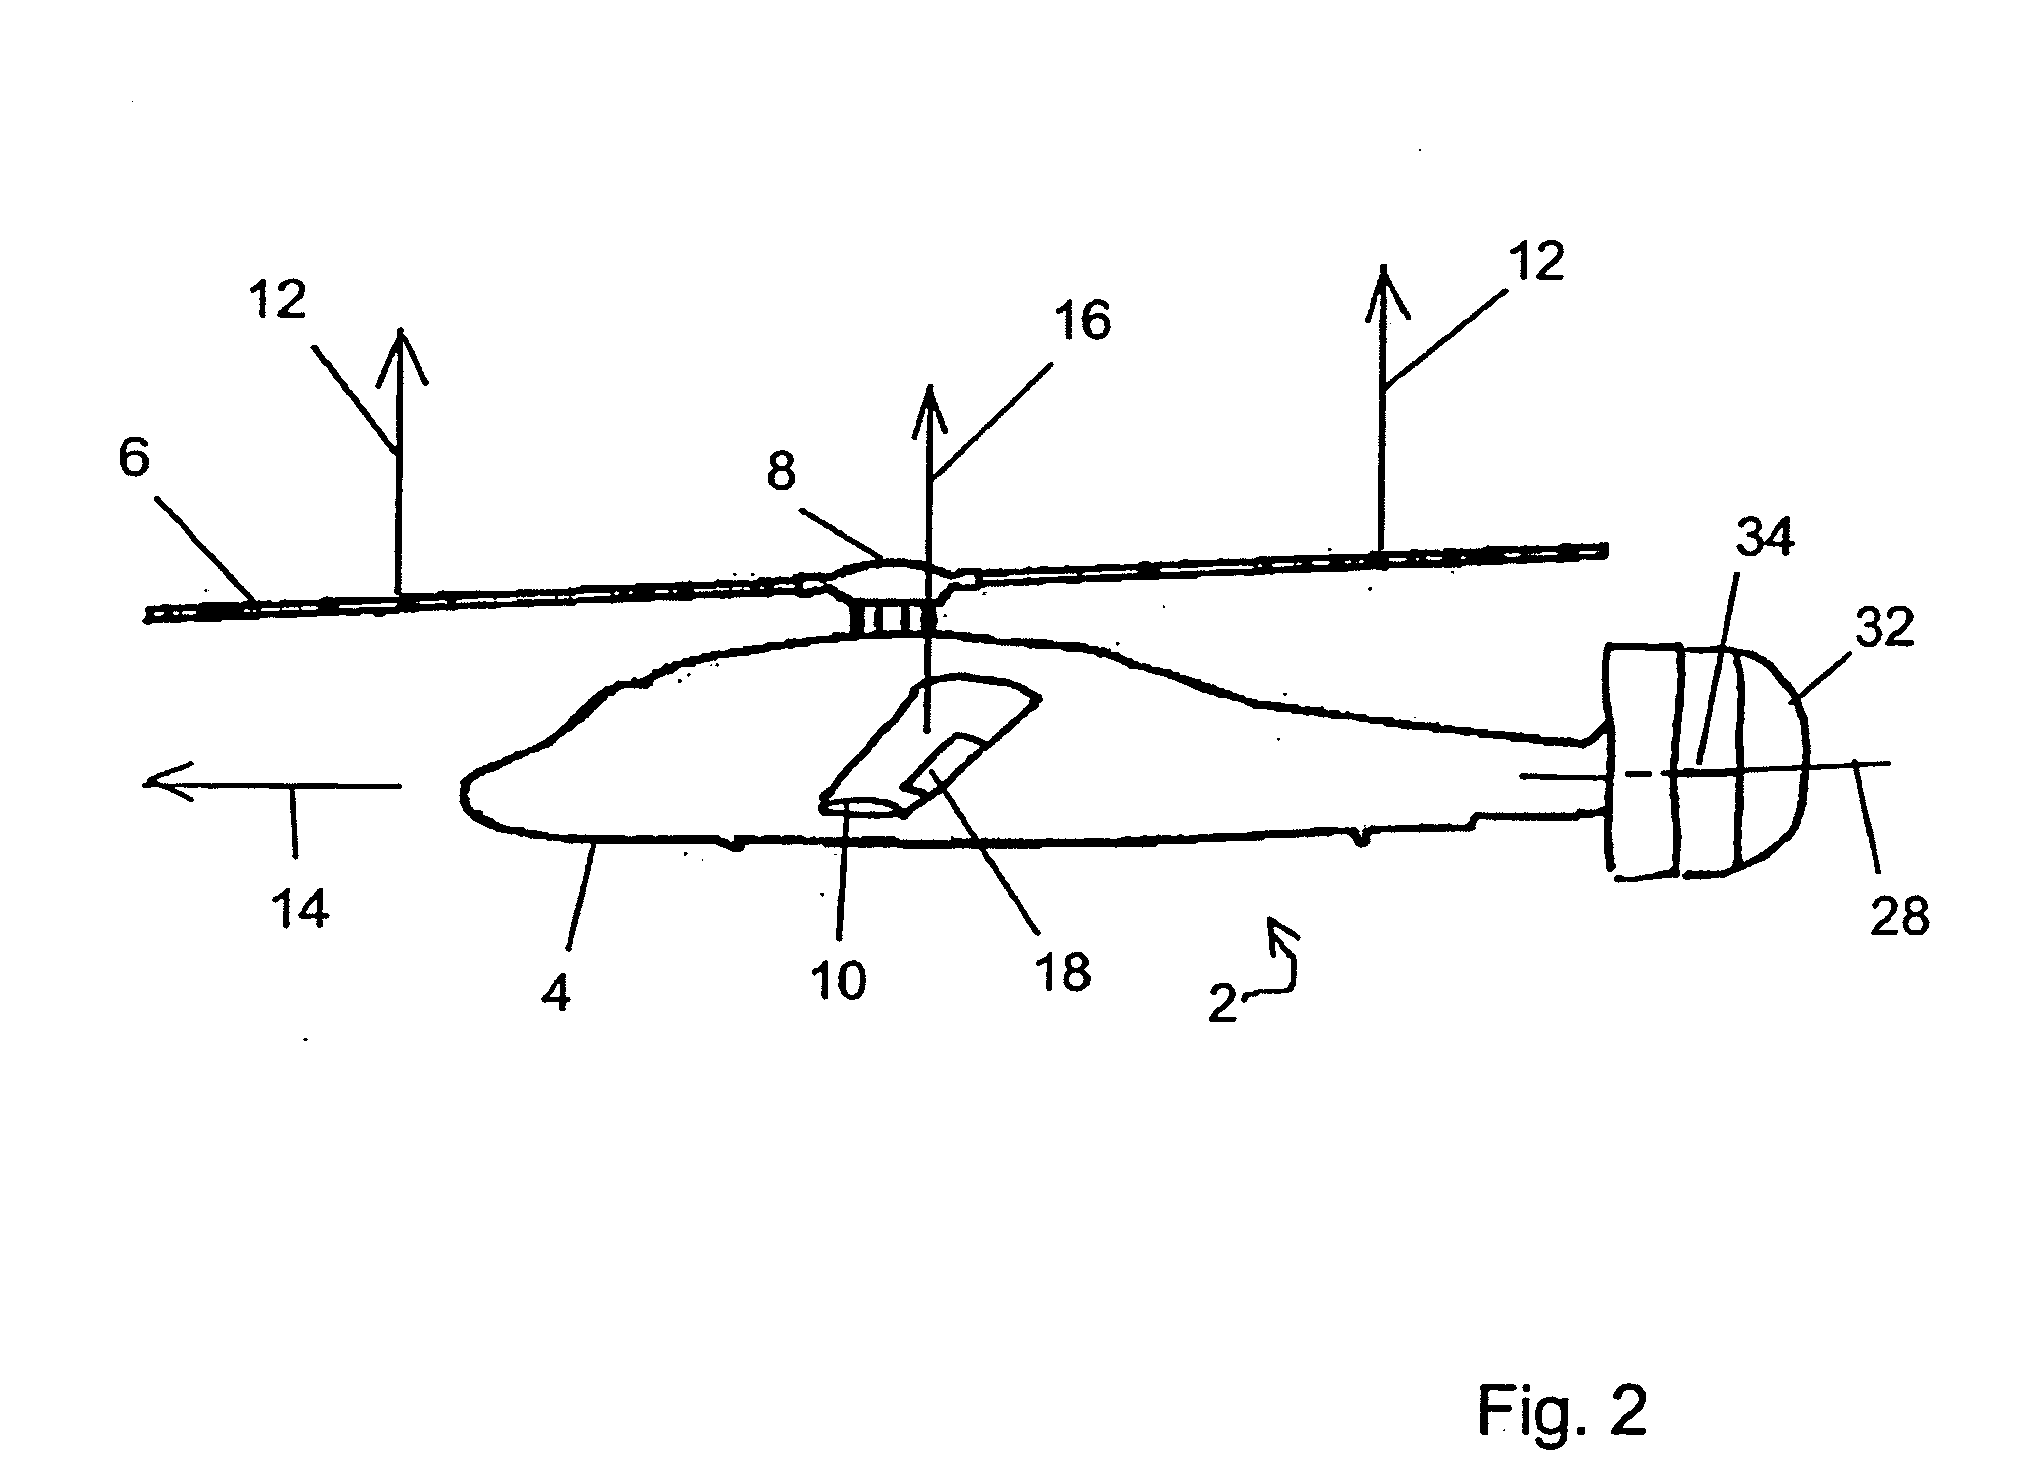 Compound aircraft control system and method